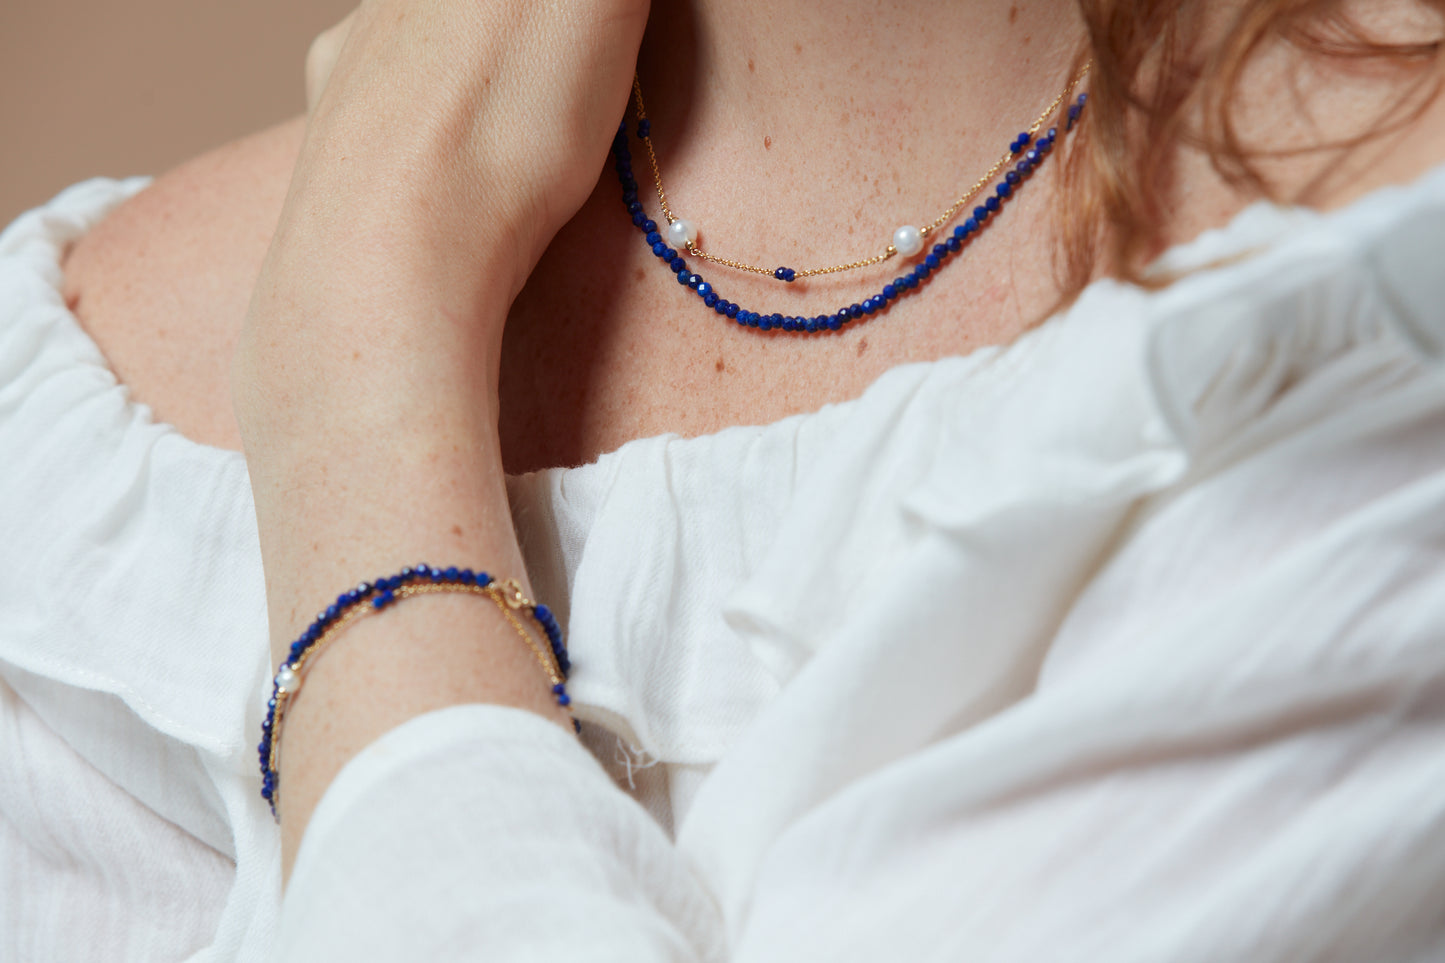 Clara fine double chain set with faceted lapis lazuli & cultured freshwater pearls